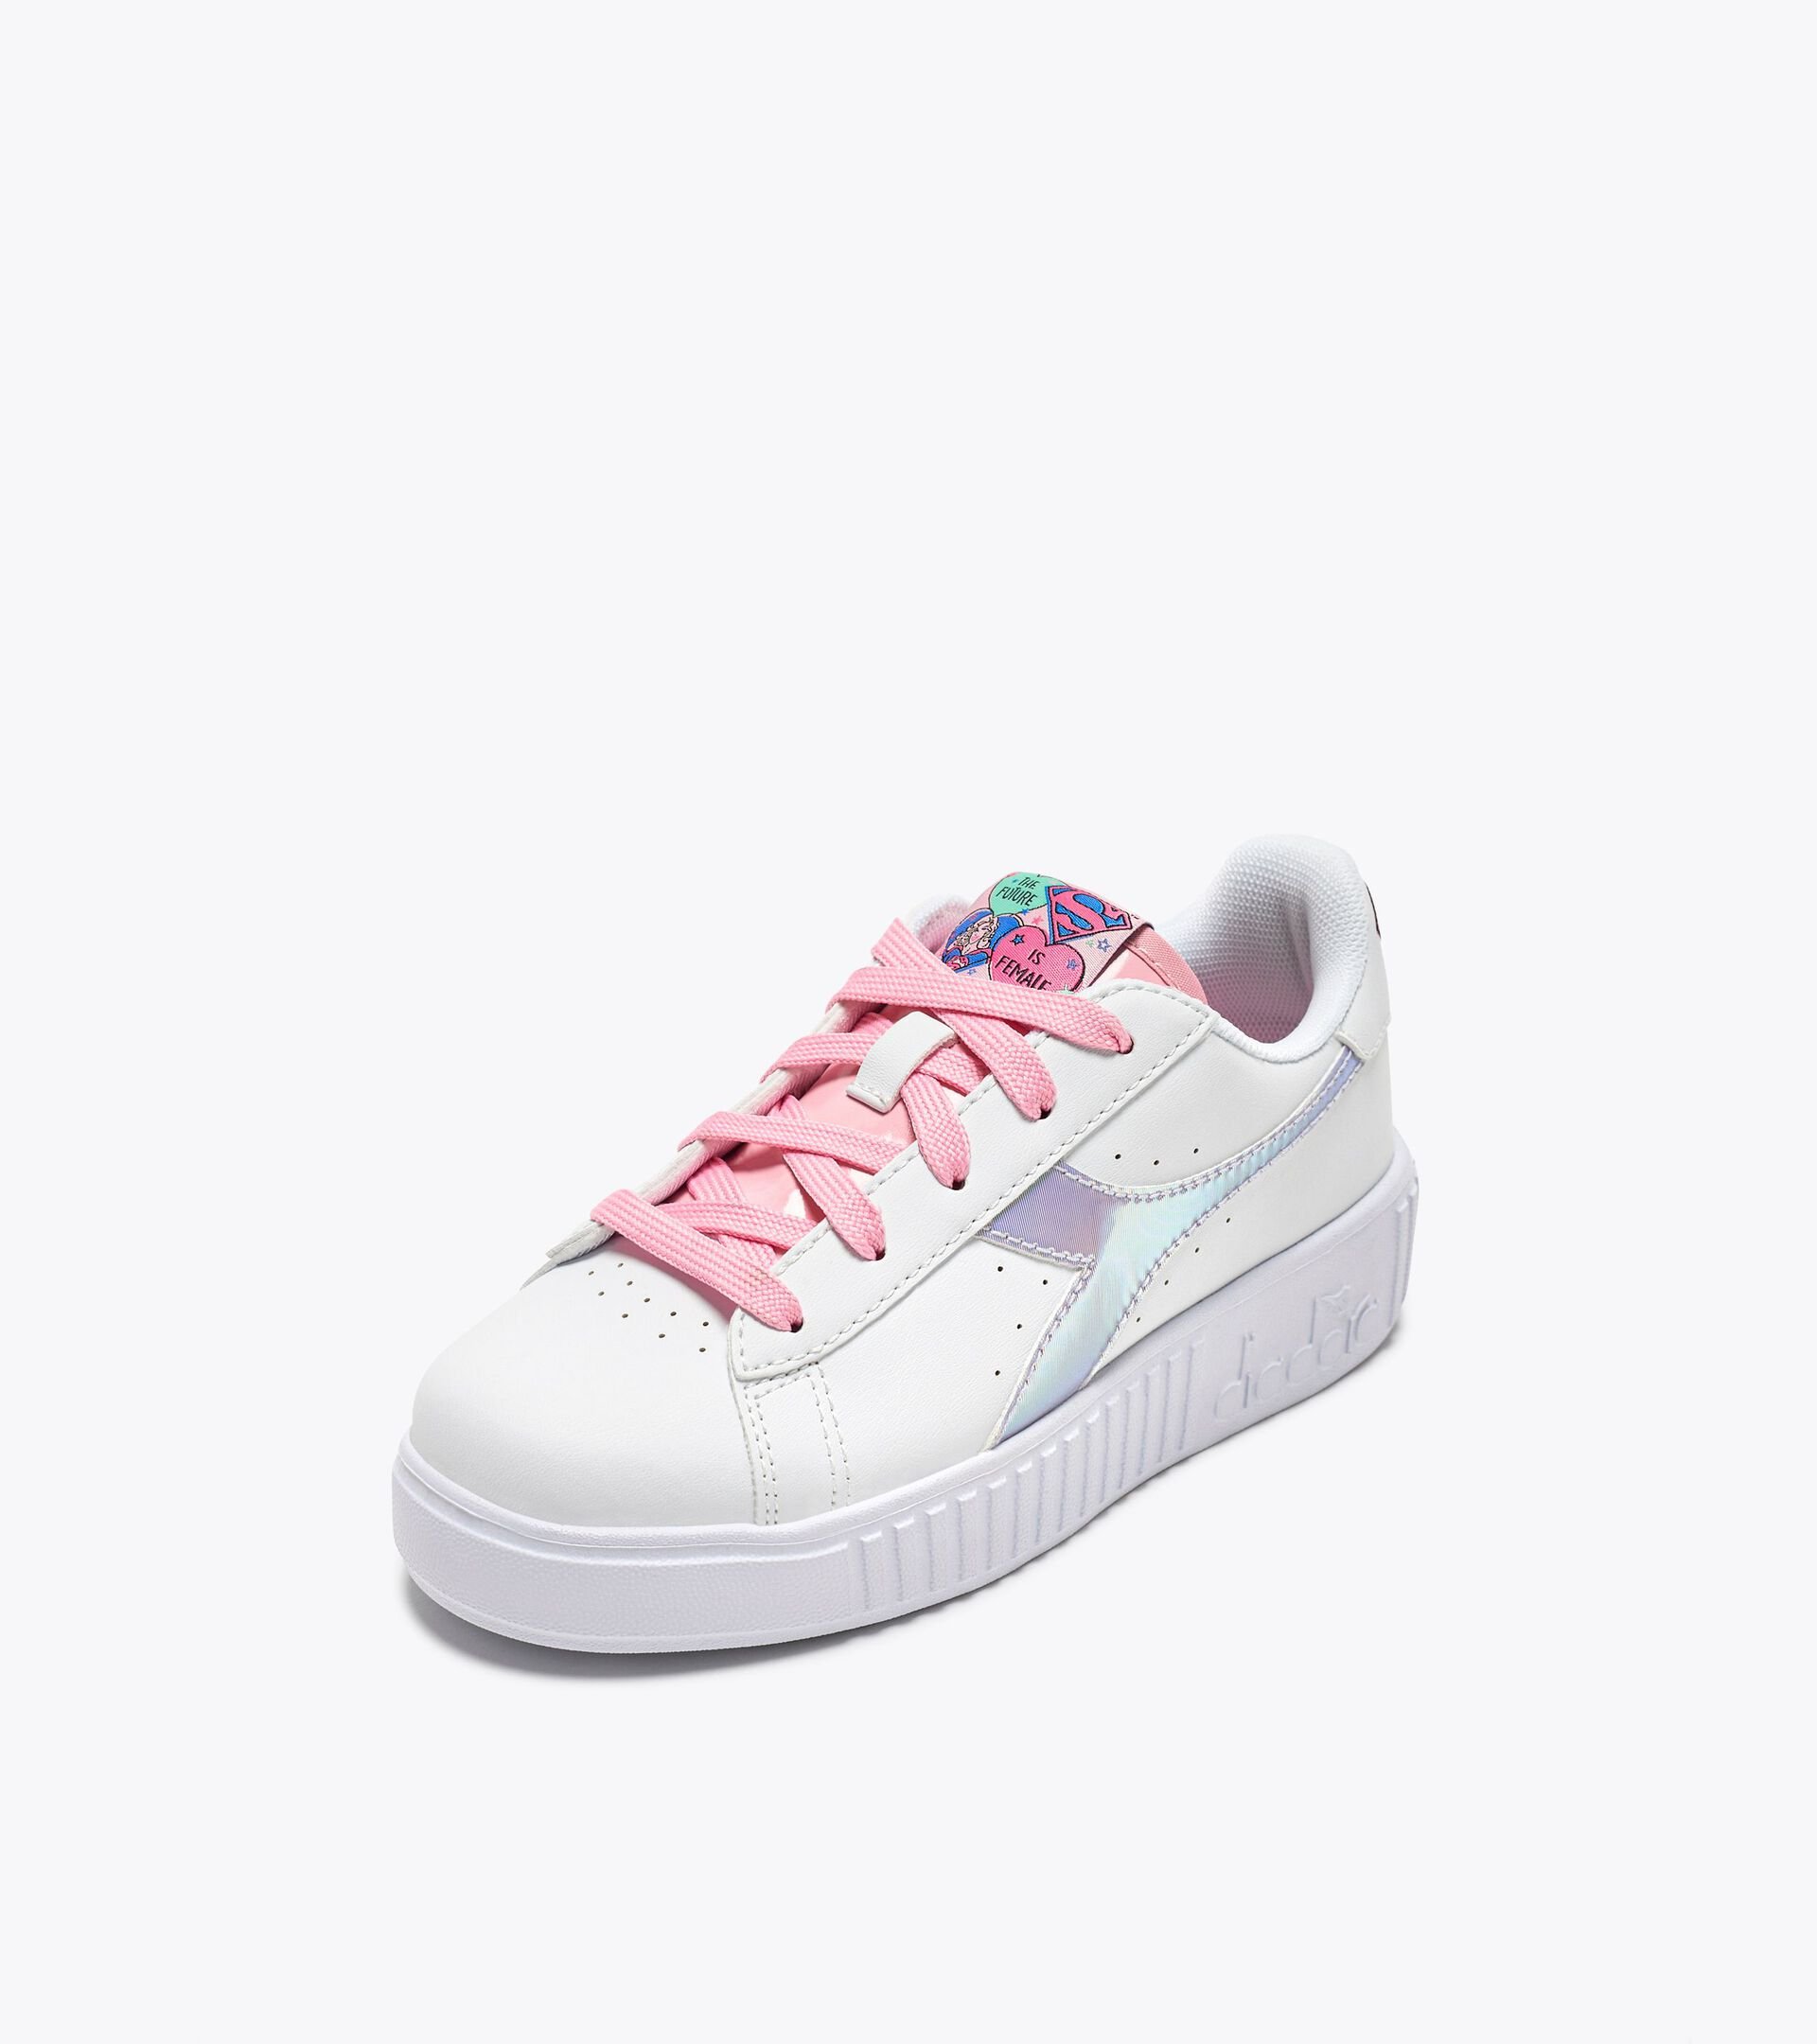 Sneakers de sport - Fille - 4-8 ans  GAME STEP  P PS SUPERGIRL BLANC/GLACE ORCHIDEE - Diadora